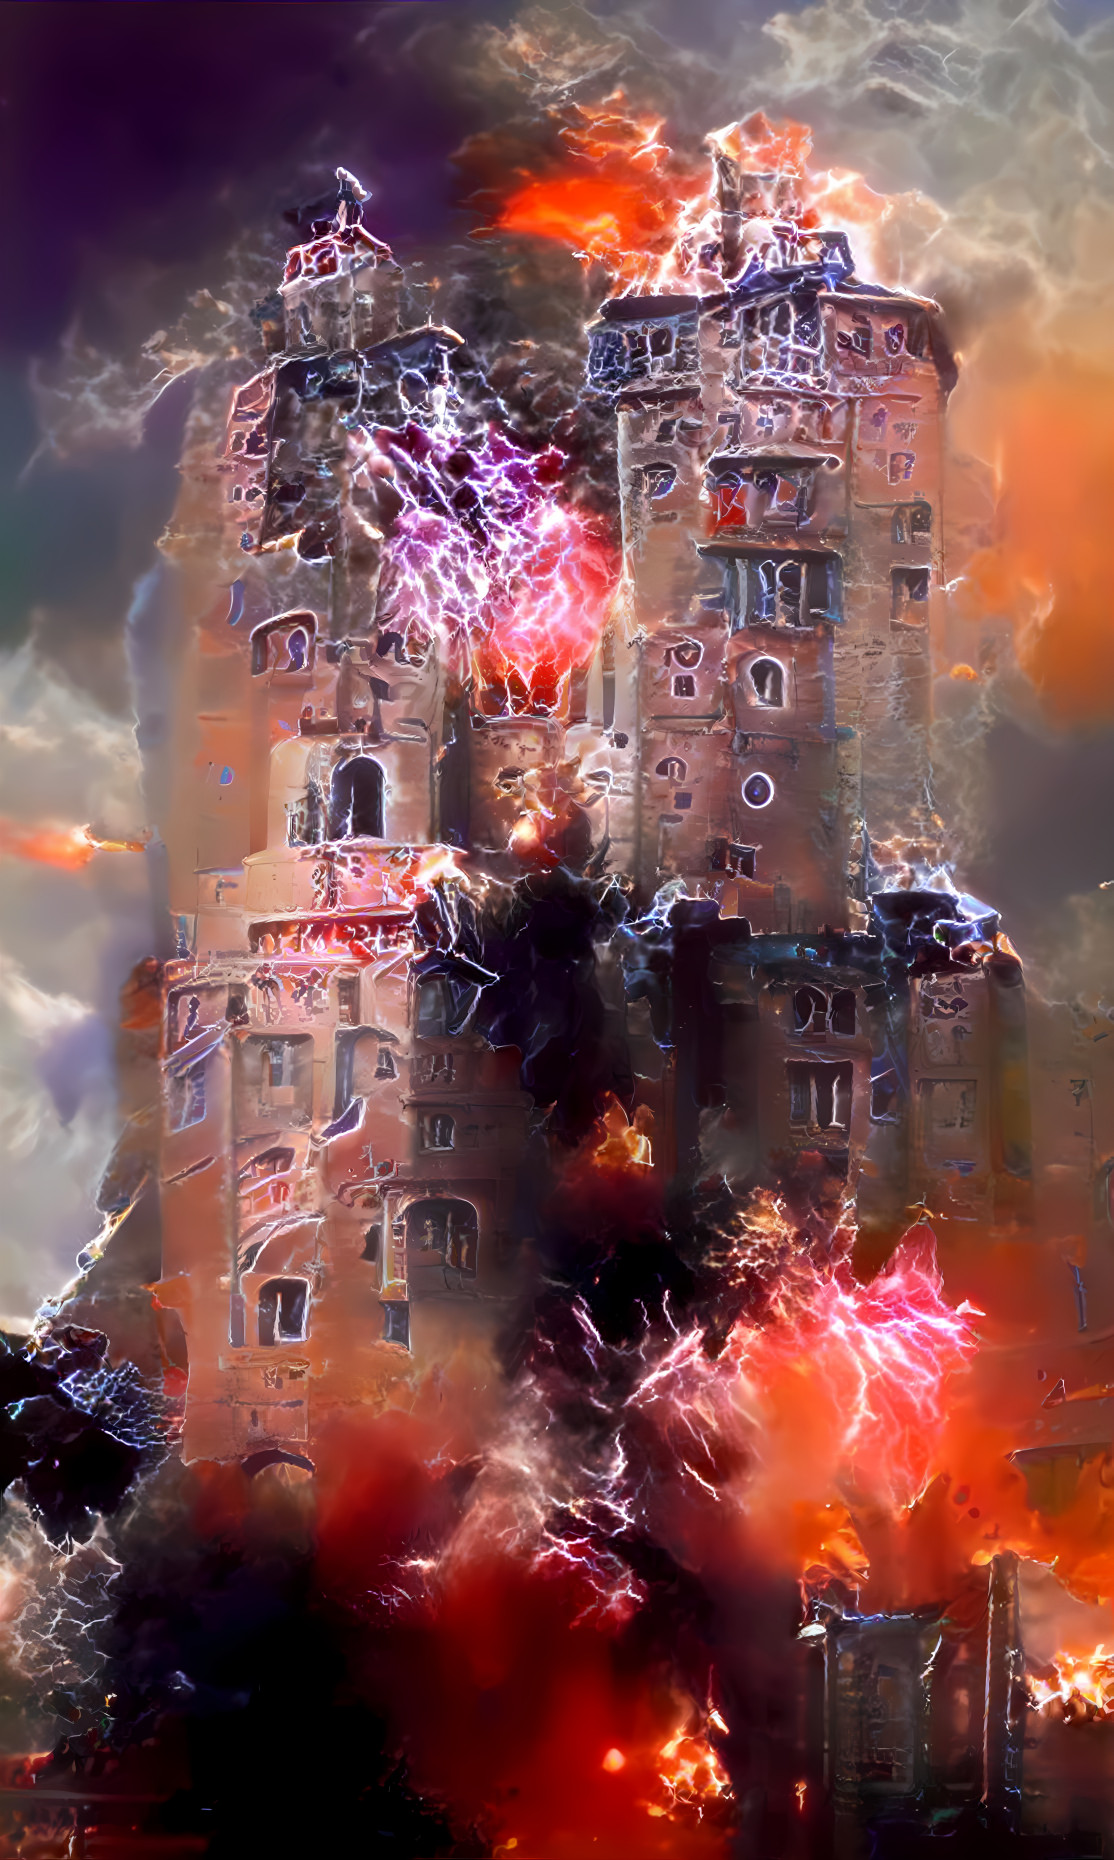 Explosions engulf Dark Arts tower, no one is safe